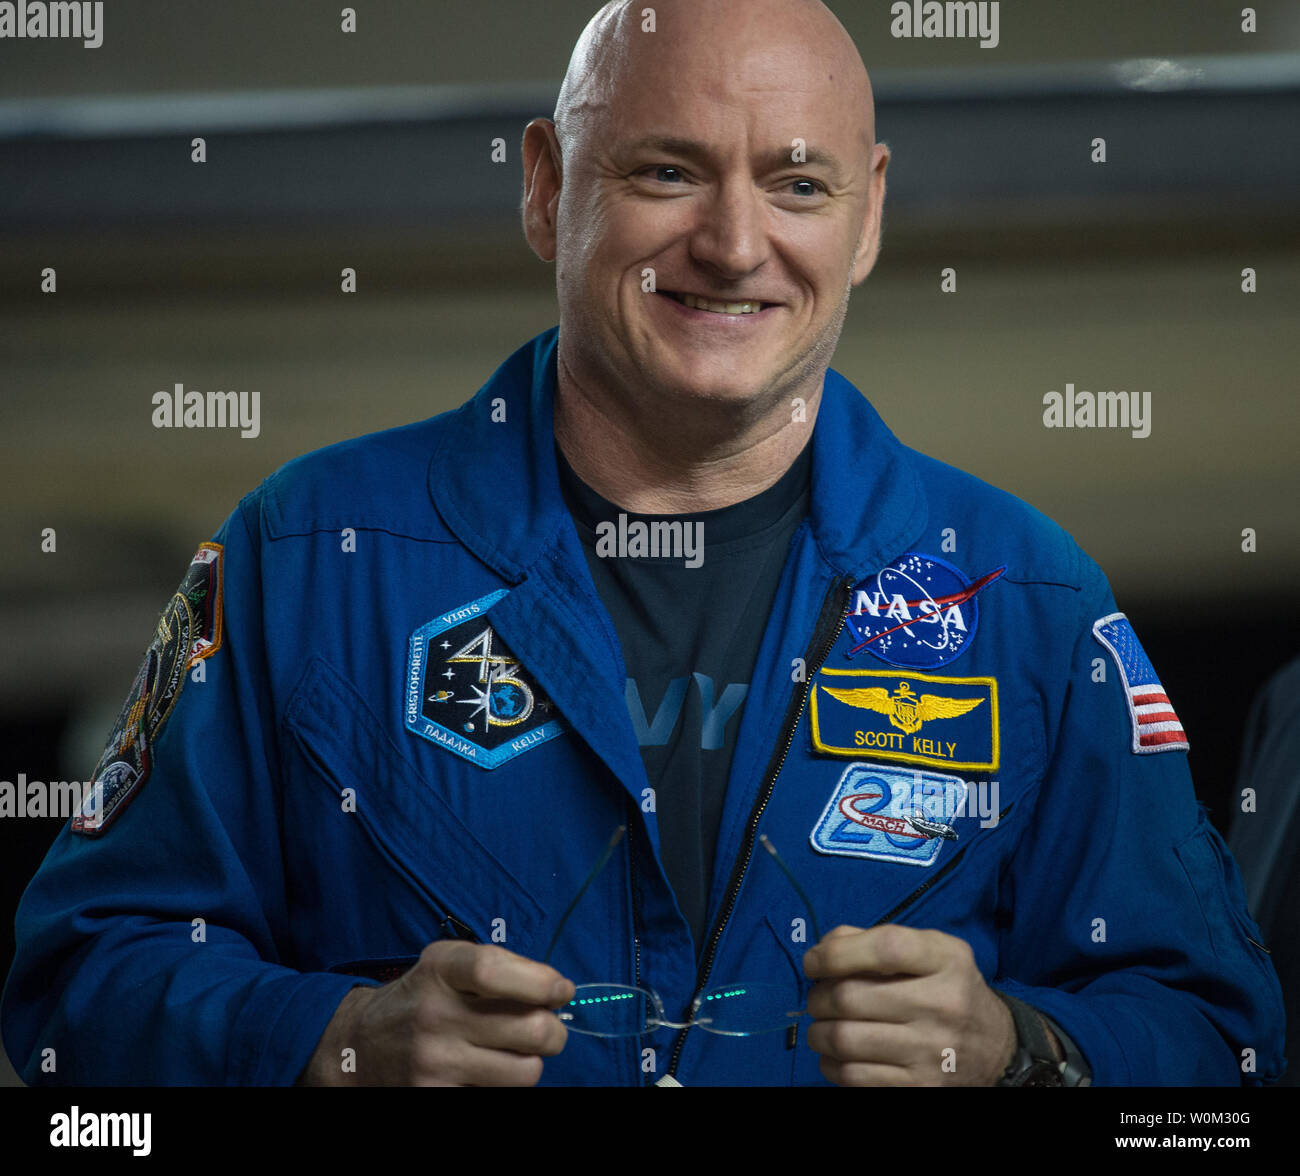 Expedition 46 Commander Scott Kelly of NASA is seen after returning to Ellington Field, Thursday, March 3, 2016 in Houston, Texas after his return to Earth the previous day. Kelly and Flight Engineers Mikhail Kornienko and Sergey Volkov of Roscosmos landed in their Soyuz TMA-18M capsule in Kazakhstan on March 1 (Eastern time). Kelly and Kornienko completed an International Space Station record year-long mission as members of Expeditions 43, 44, 45, and 46 to collect valuable data on the effect of long duration weightlessness on the human body that will be used to formulate a human mission to M Stock Photo